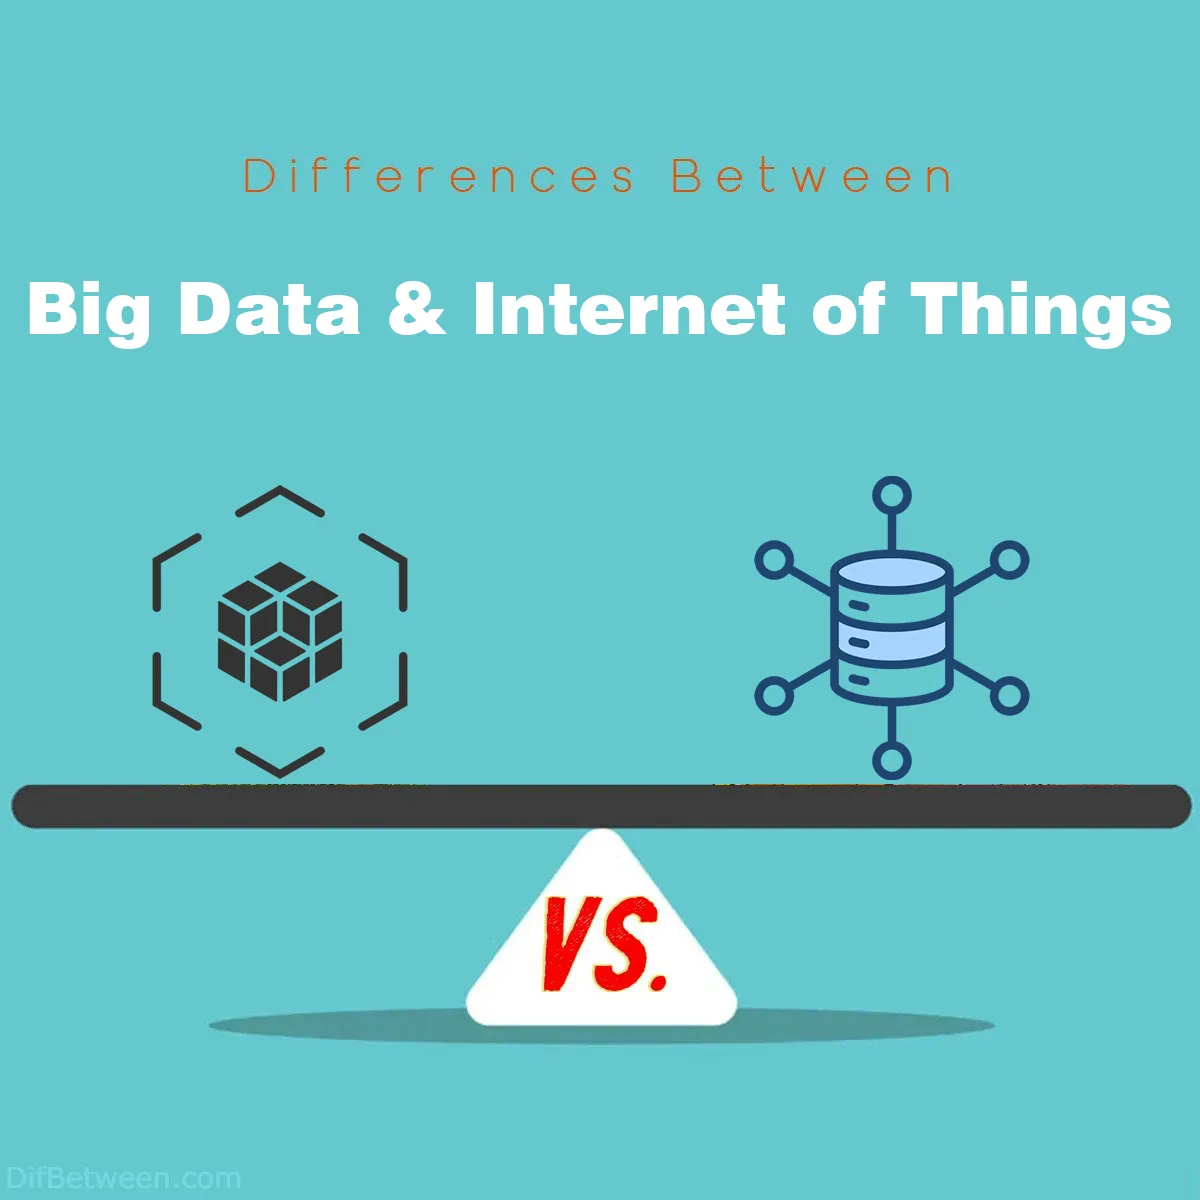 Differences Between Big Data and Internet of Things